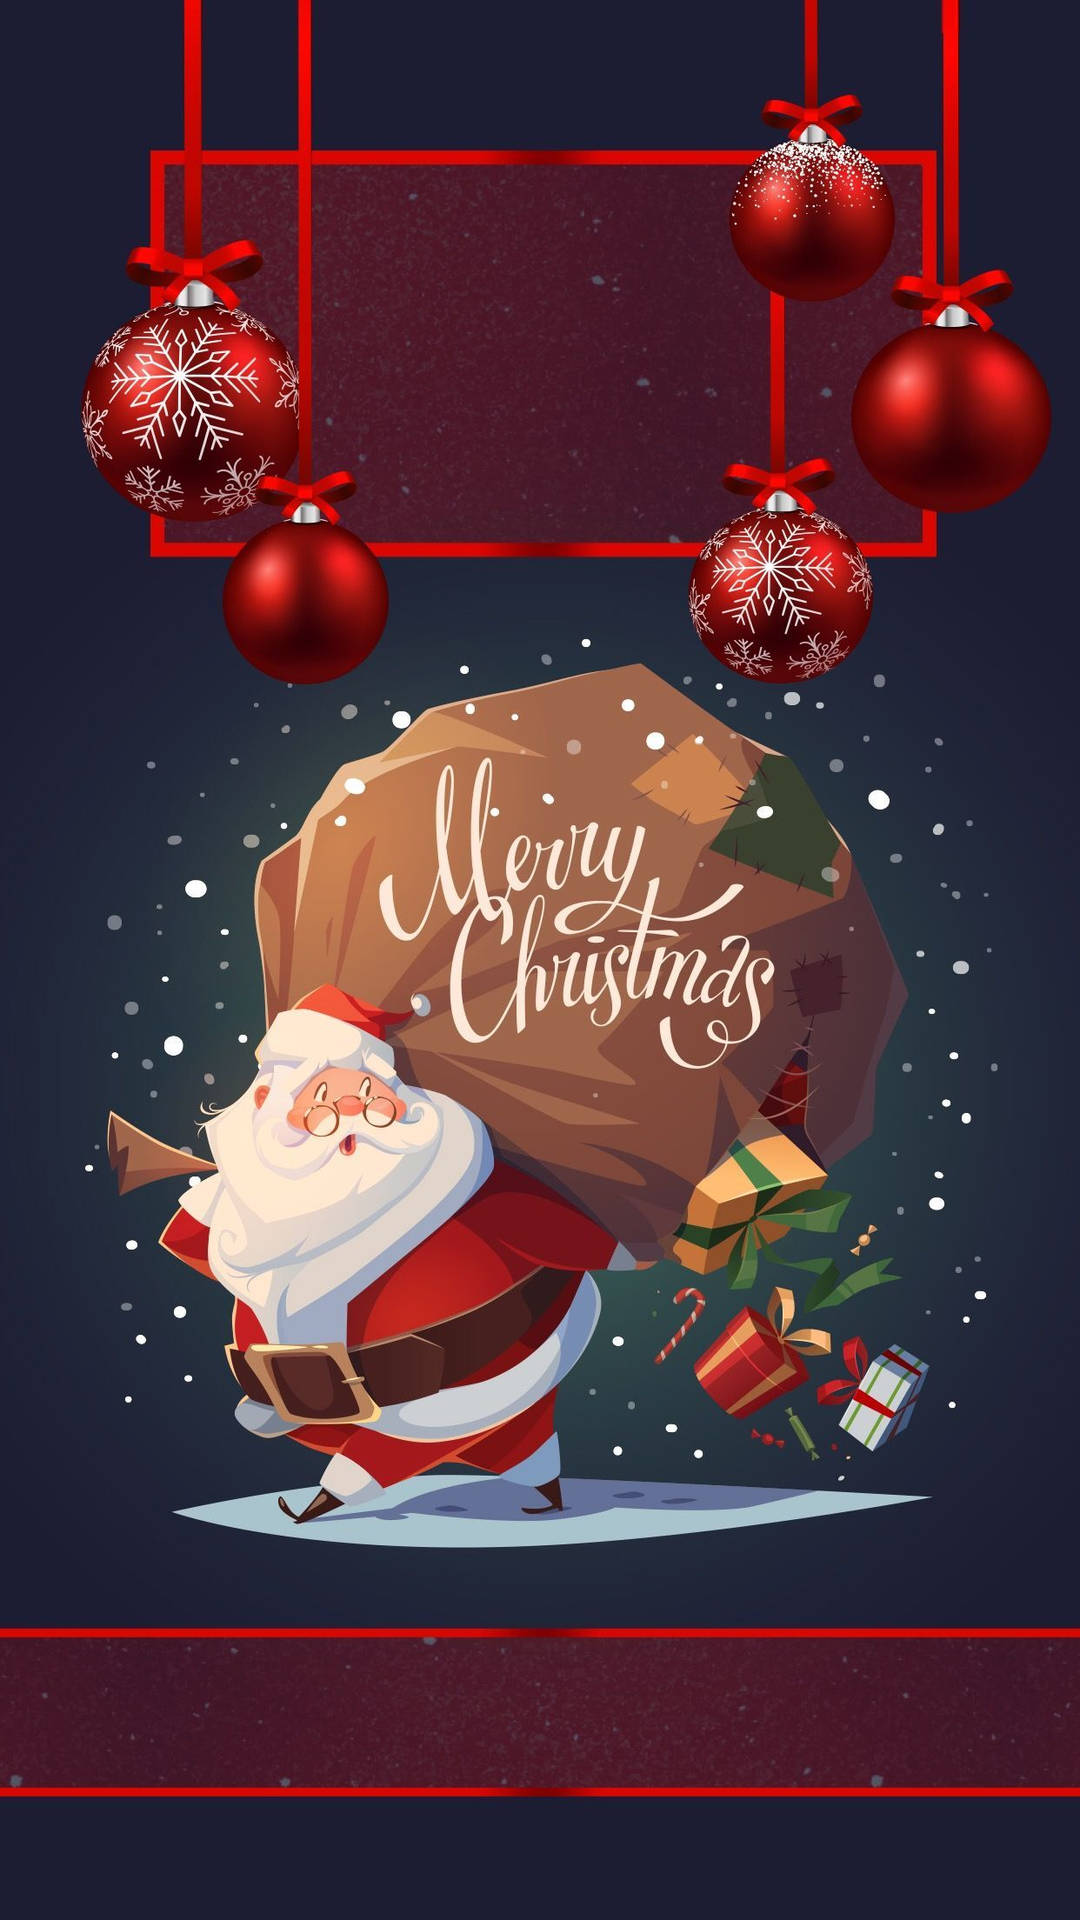 Caption: Santa Claus Delivering Christmas Gifts - Iphone Wallpaper Wallpaper